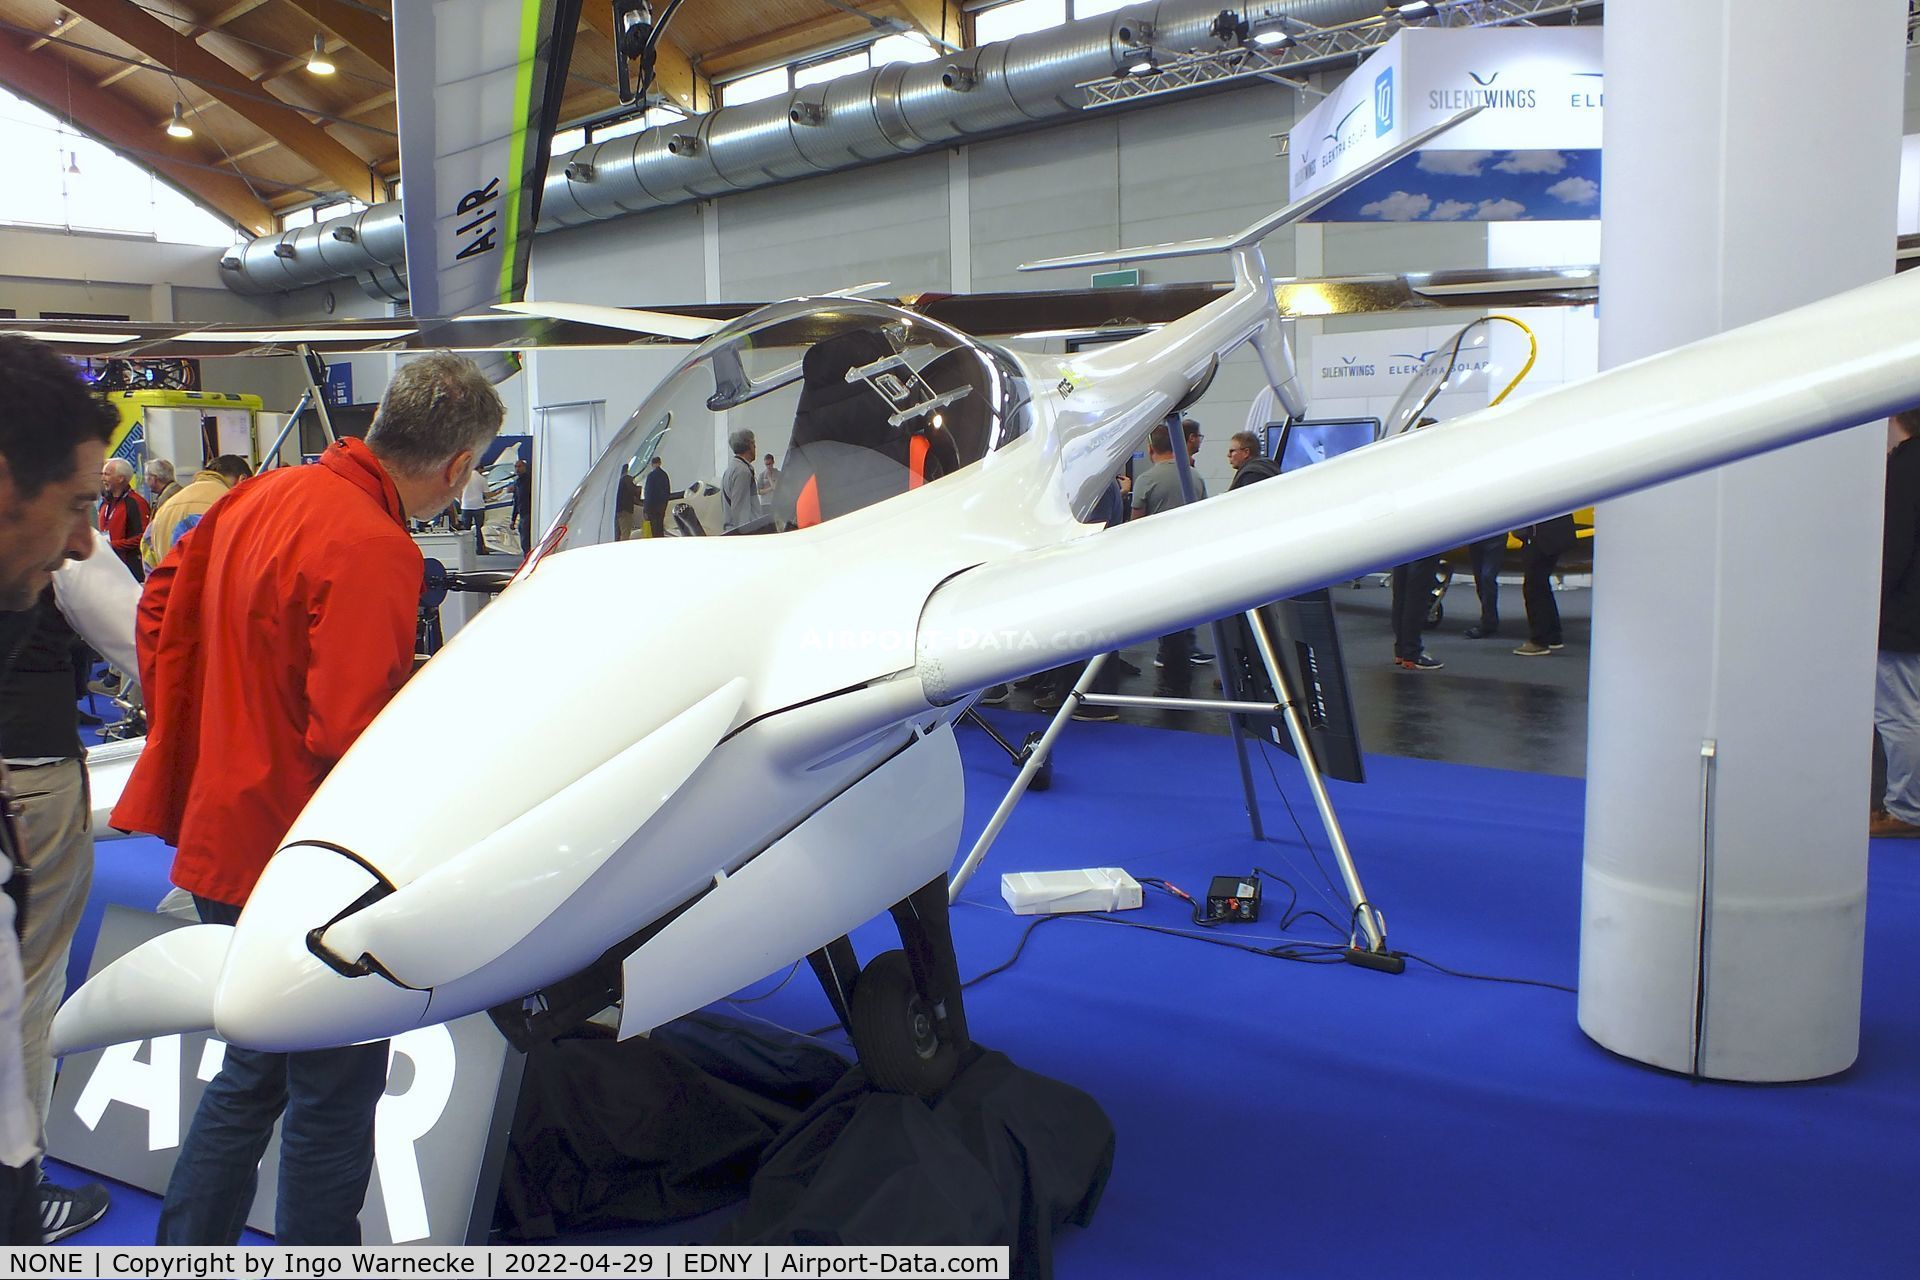 NONE, A-I-R ATOS Wing C/N not found_none, A-I-R ATOS Wing with electric motor at the AERO 2022, Friedrichshafen